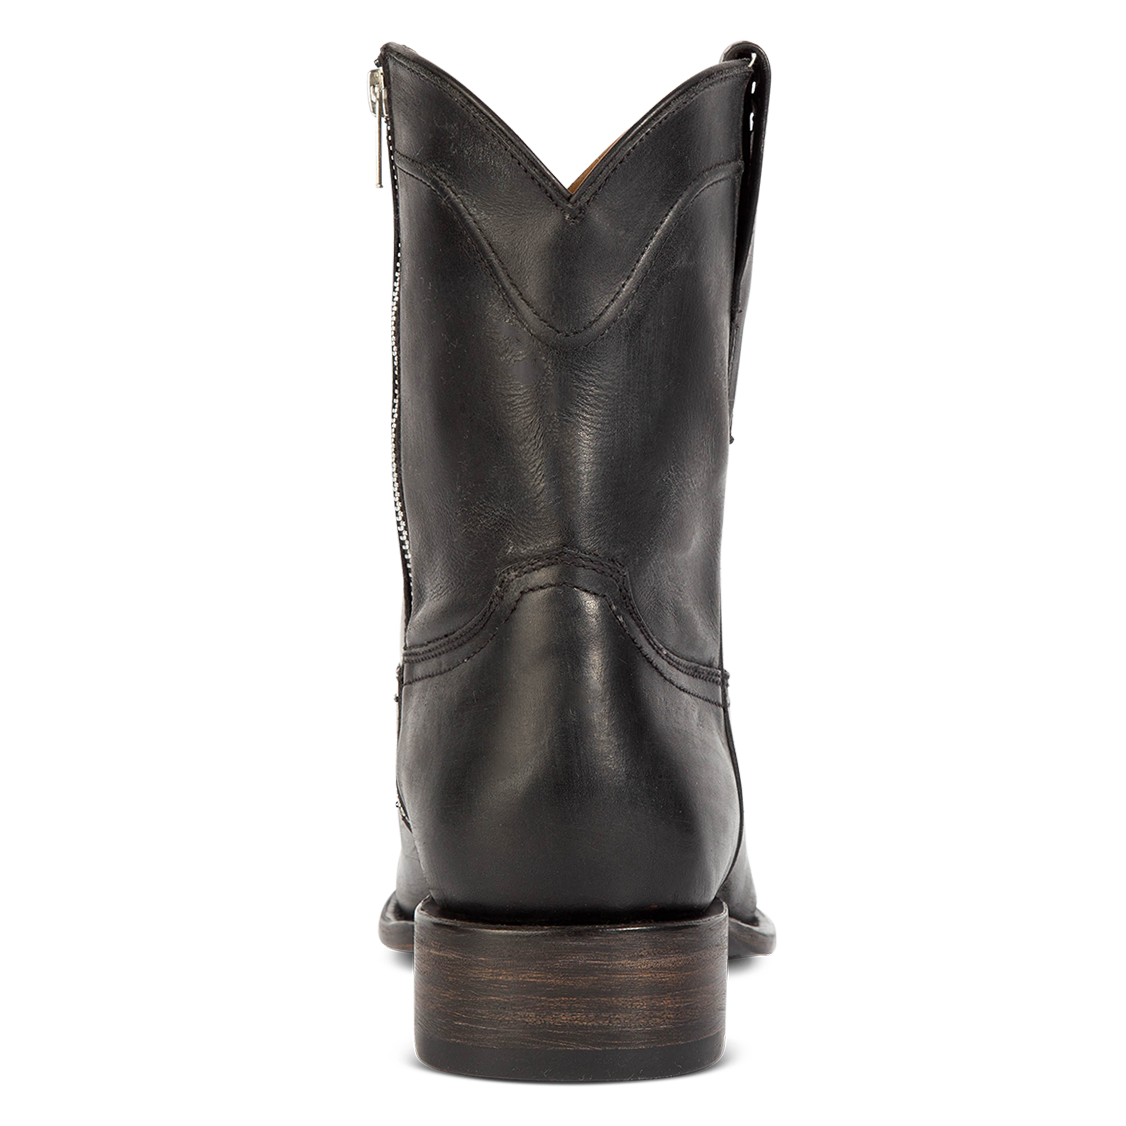 Back view showing low heel on FREEBIRD men's Henderson black leather mid calf boot